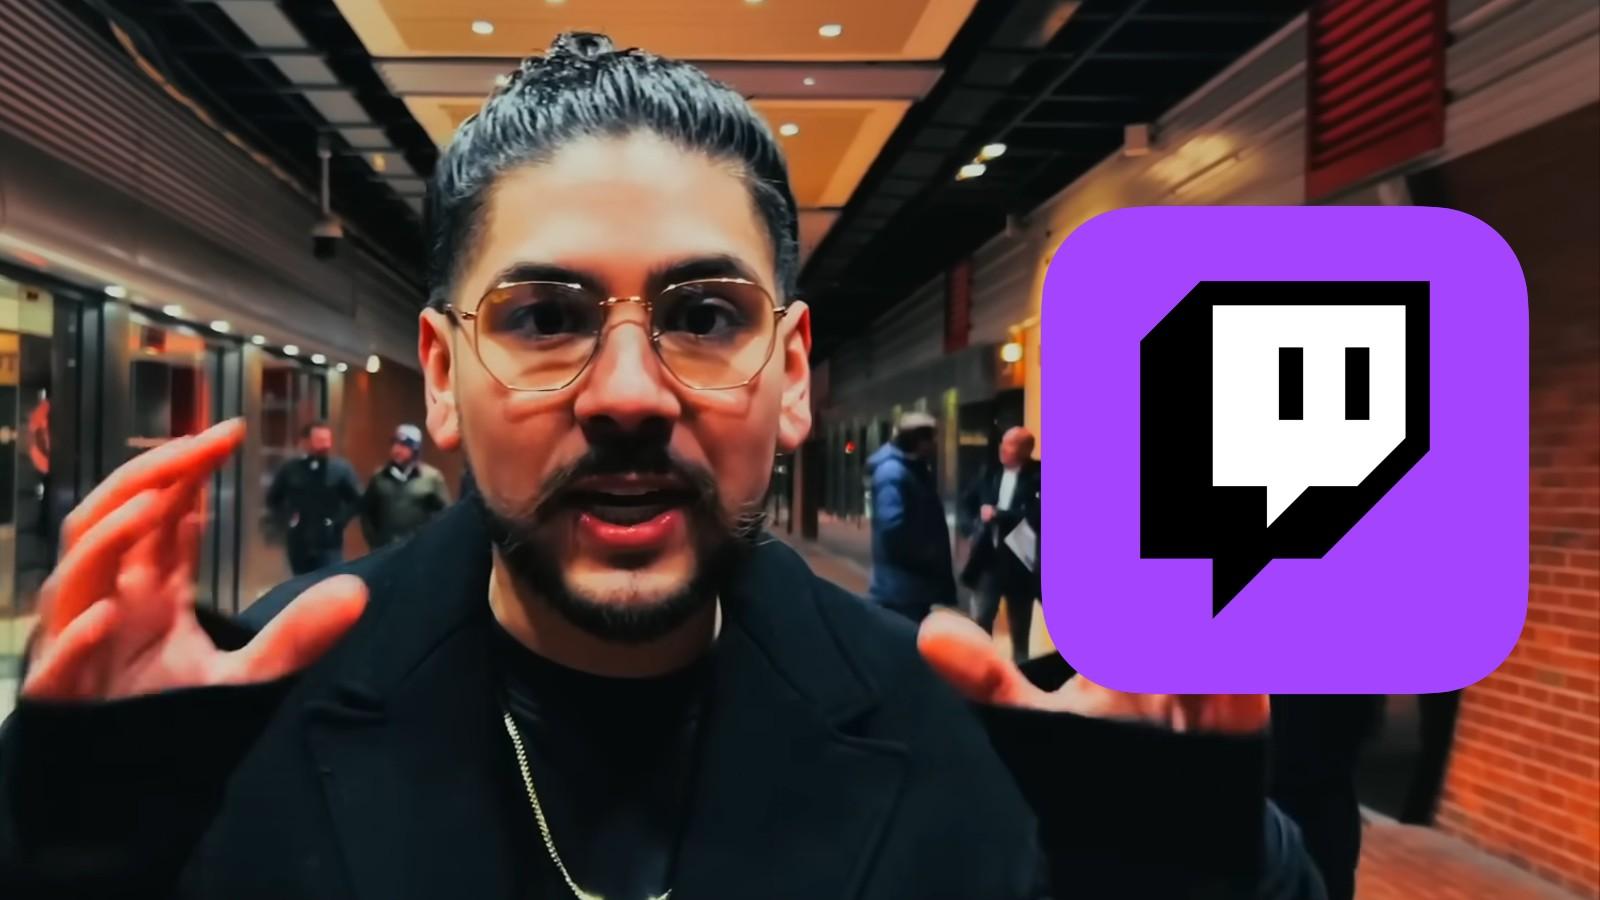 Castro1021 was banned from Twitch